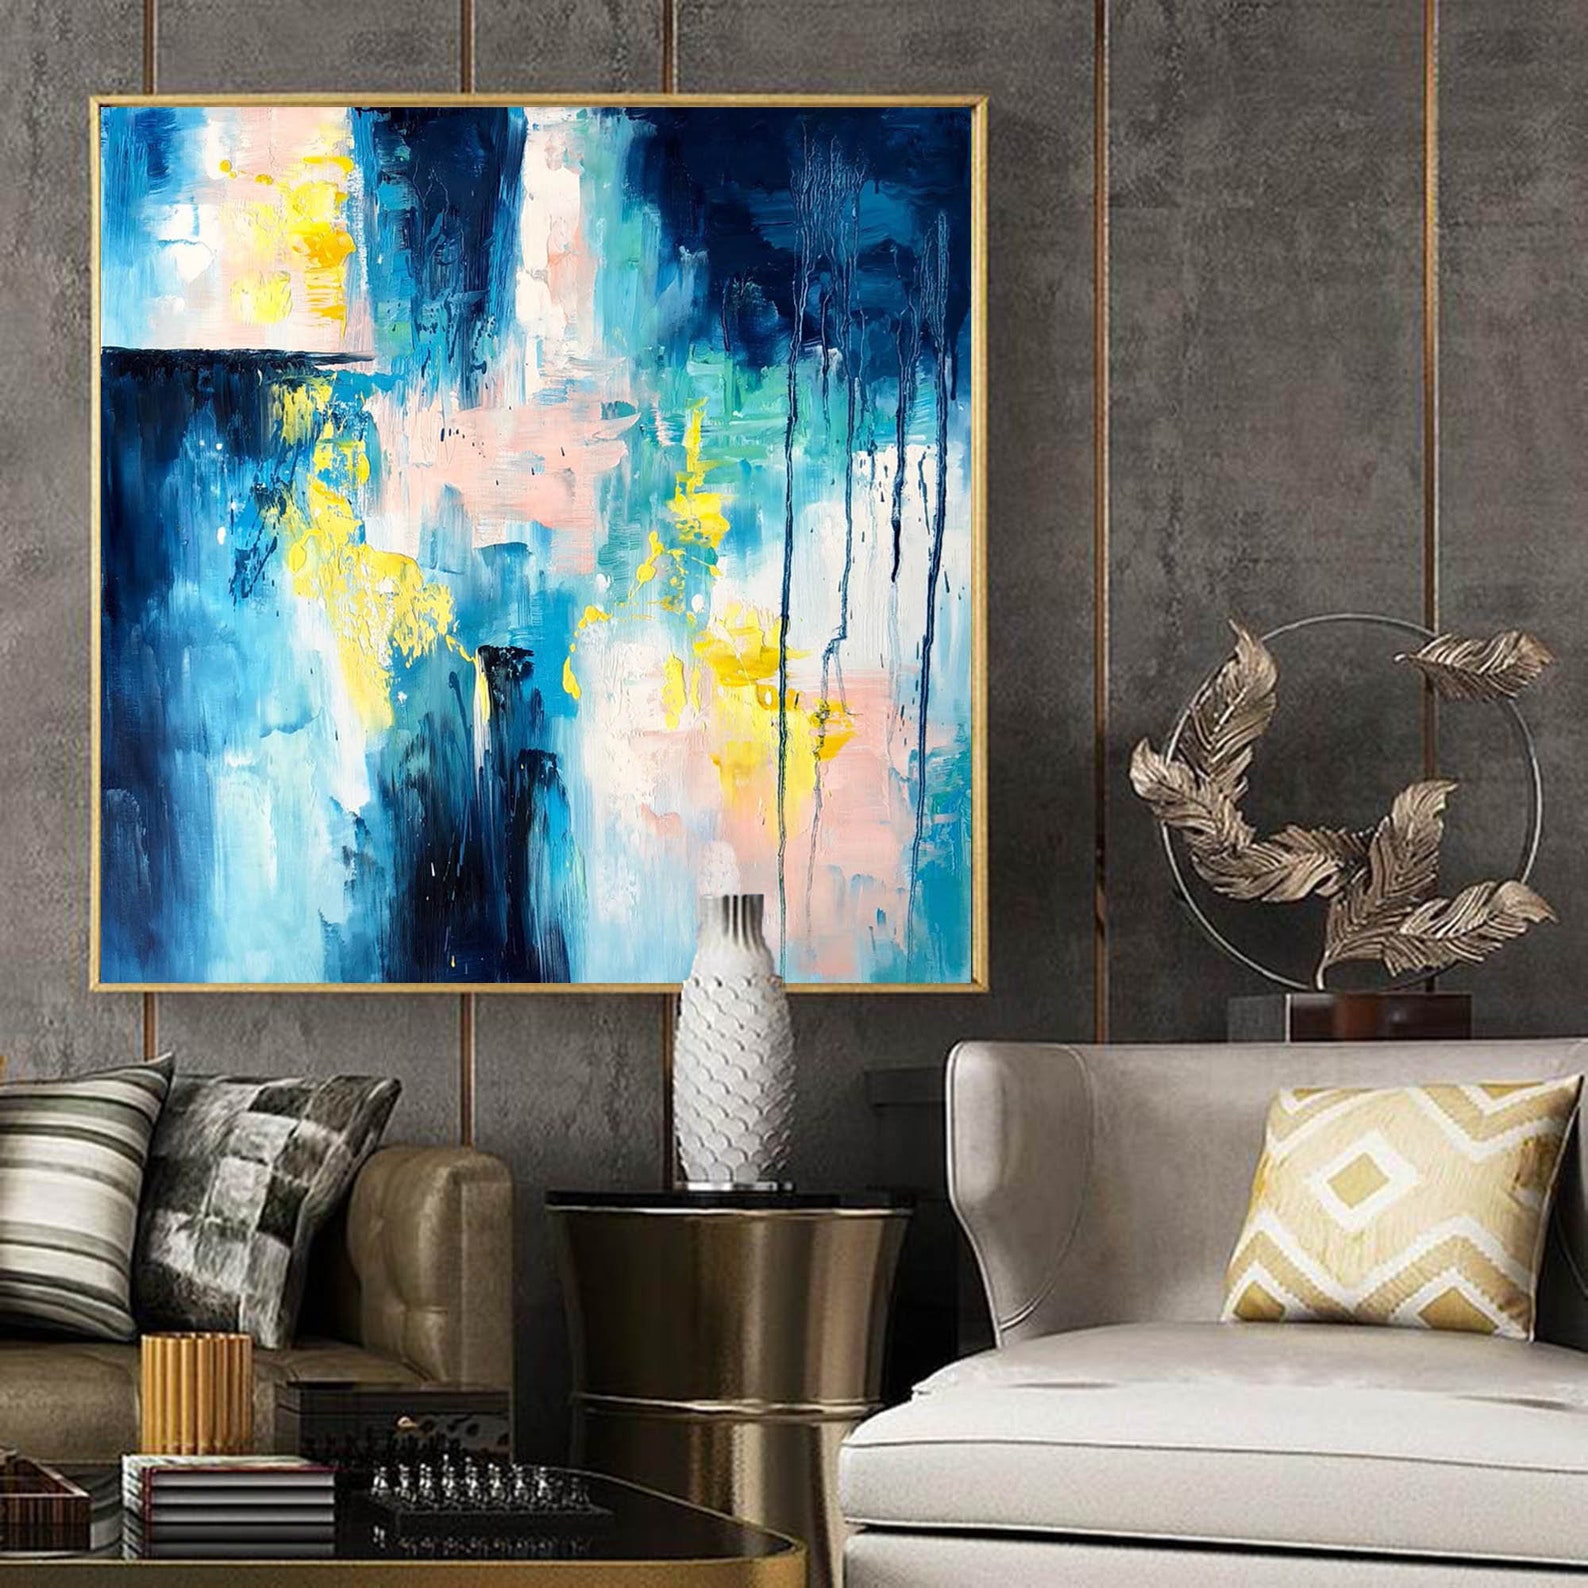 Extra Large Original Painting on Canvaslarge Framed Abstract - Etsy